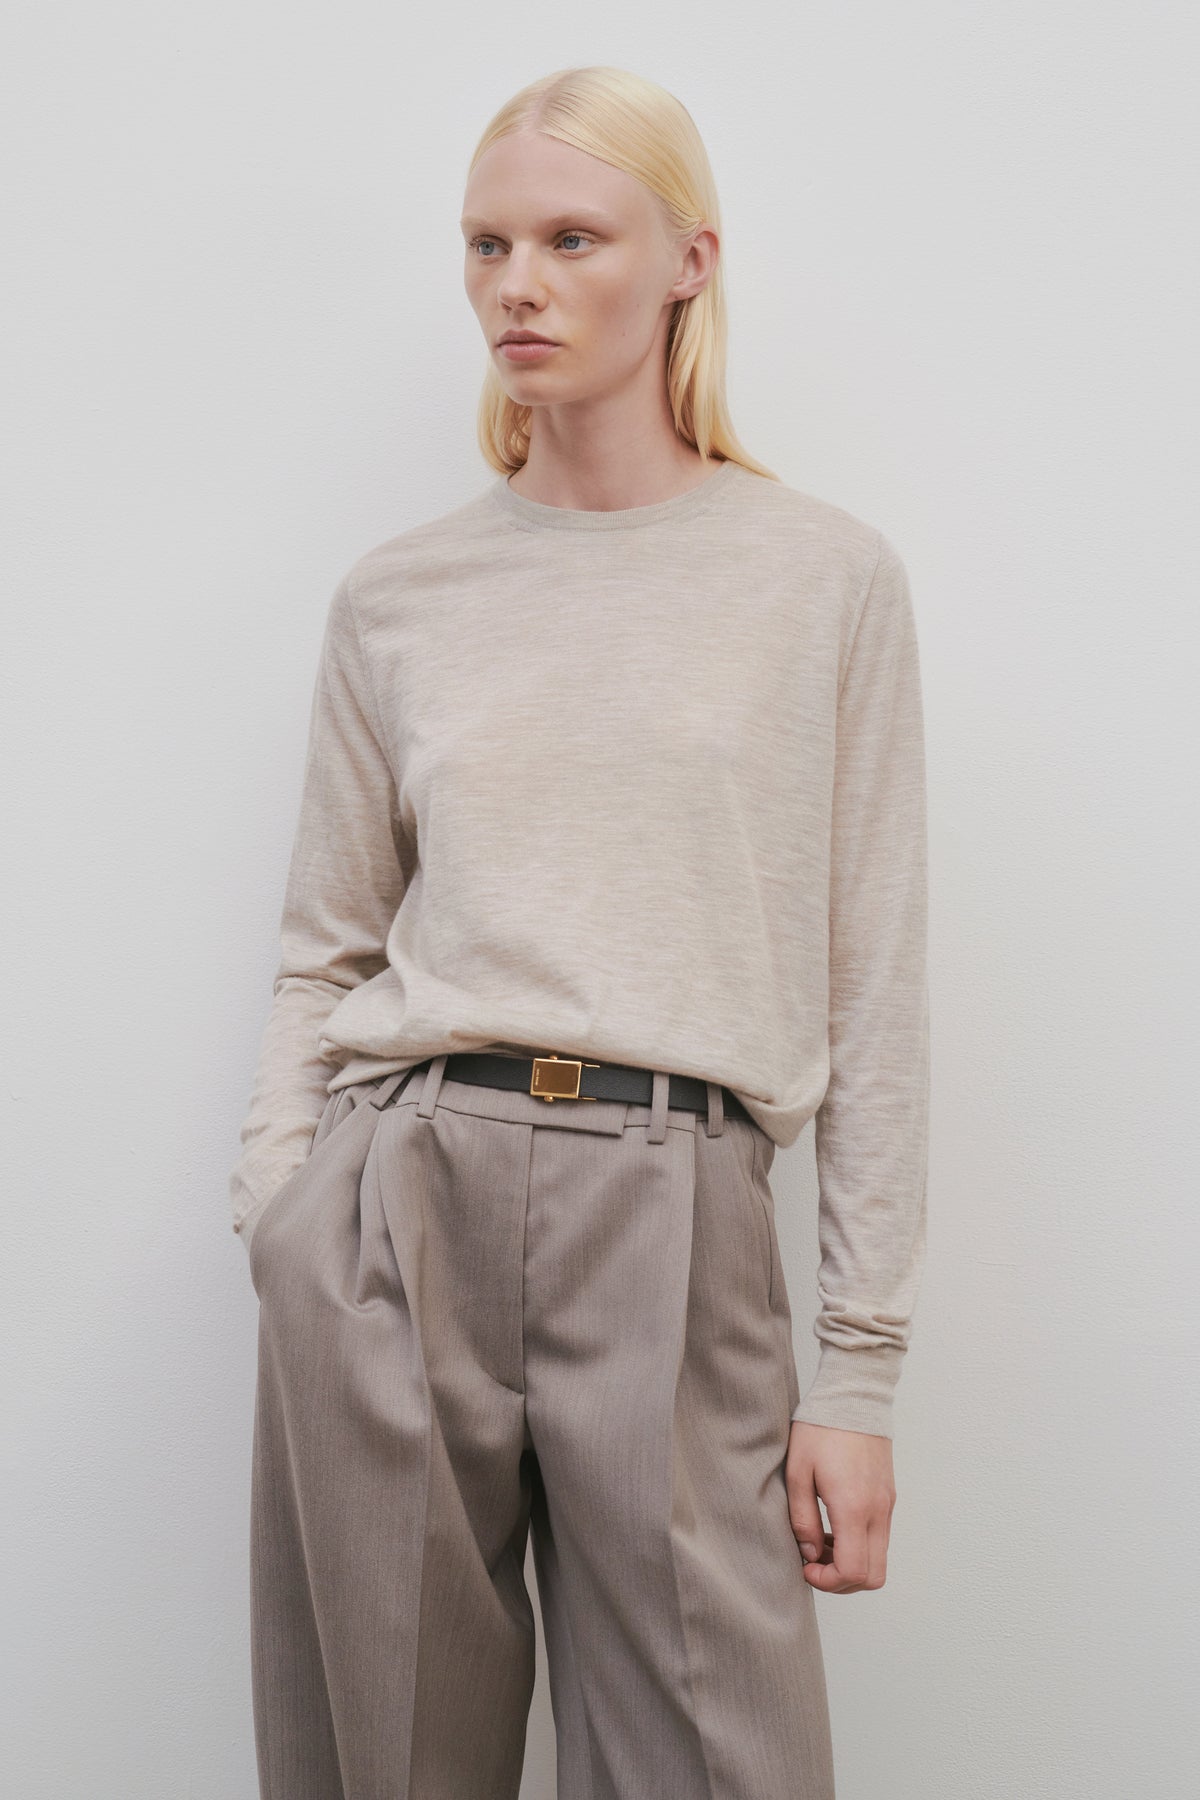 Exeter Top in Cashmere